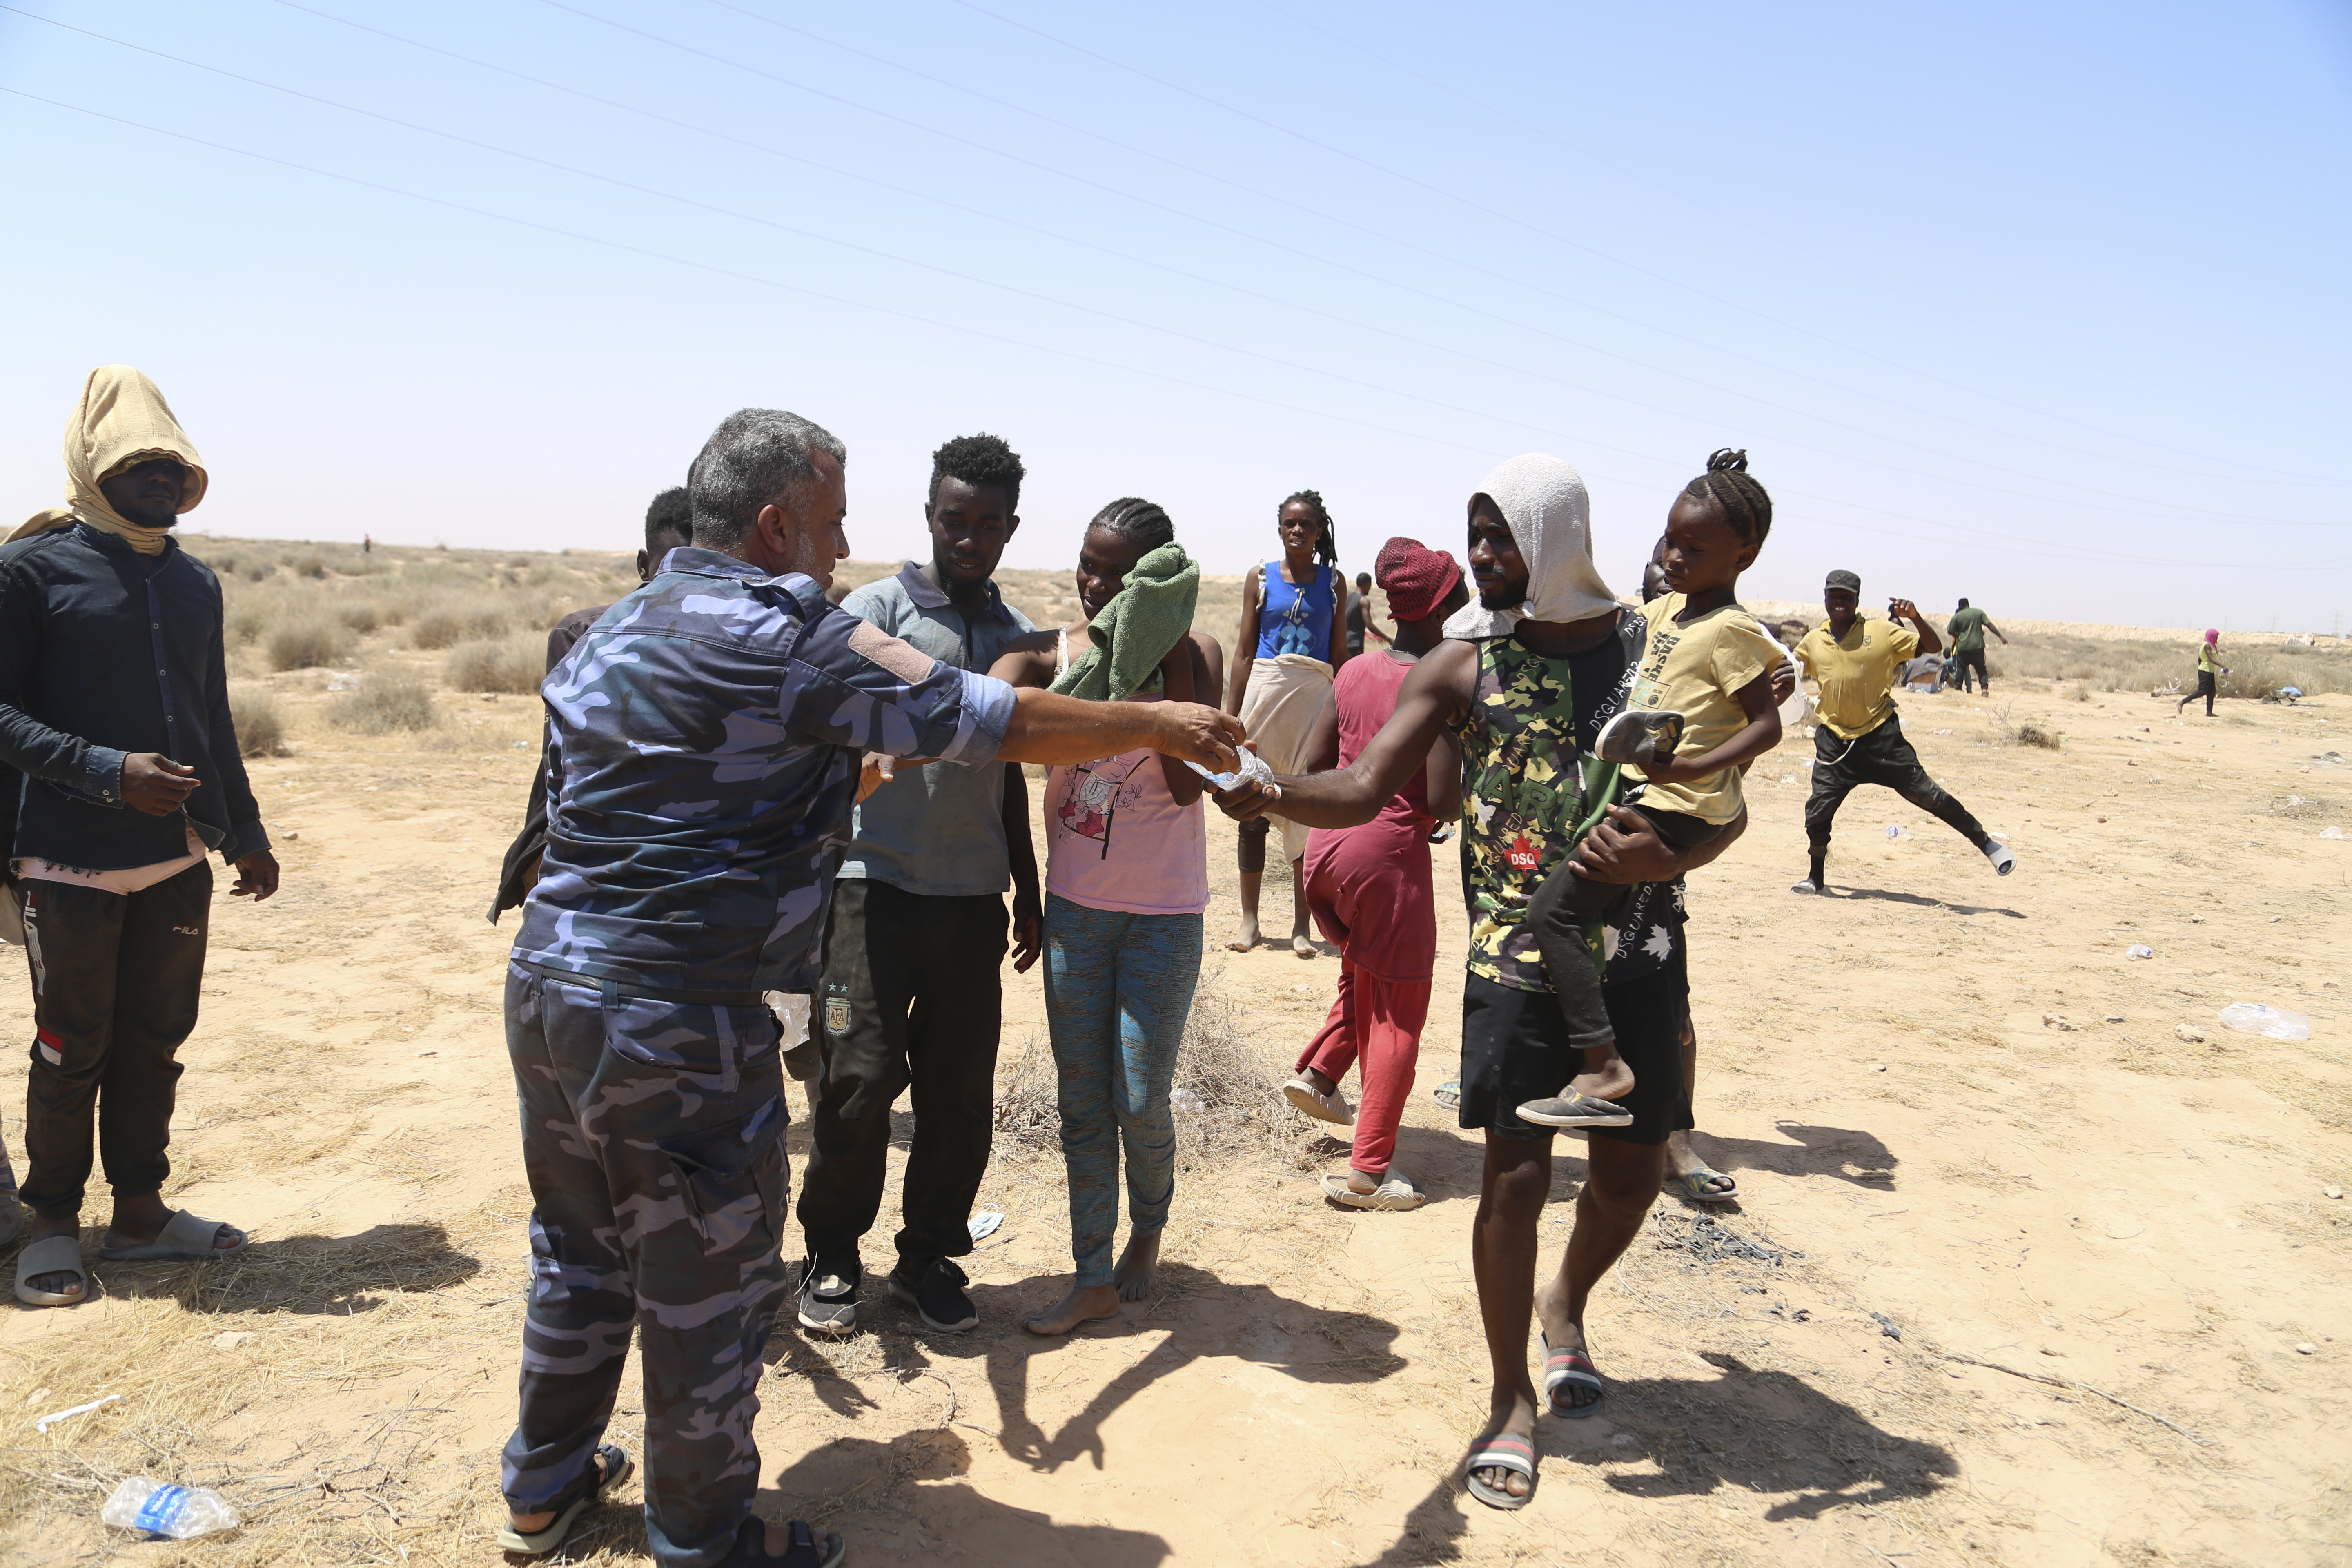 Libyan policeman gives water to African migrants on the Libyan border with Tunisia on Thursday, Aug. 4, 2023. The Tunisian security forces reportedly expelled hundreds of migrants over the border into Libya, where they have been stranded in scorching summer temperatures without water and food since June. (AP Photo/Yousef Murad)


Associated Press/LaPresse
Only Italy and Spain